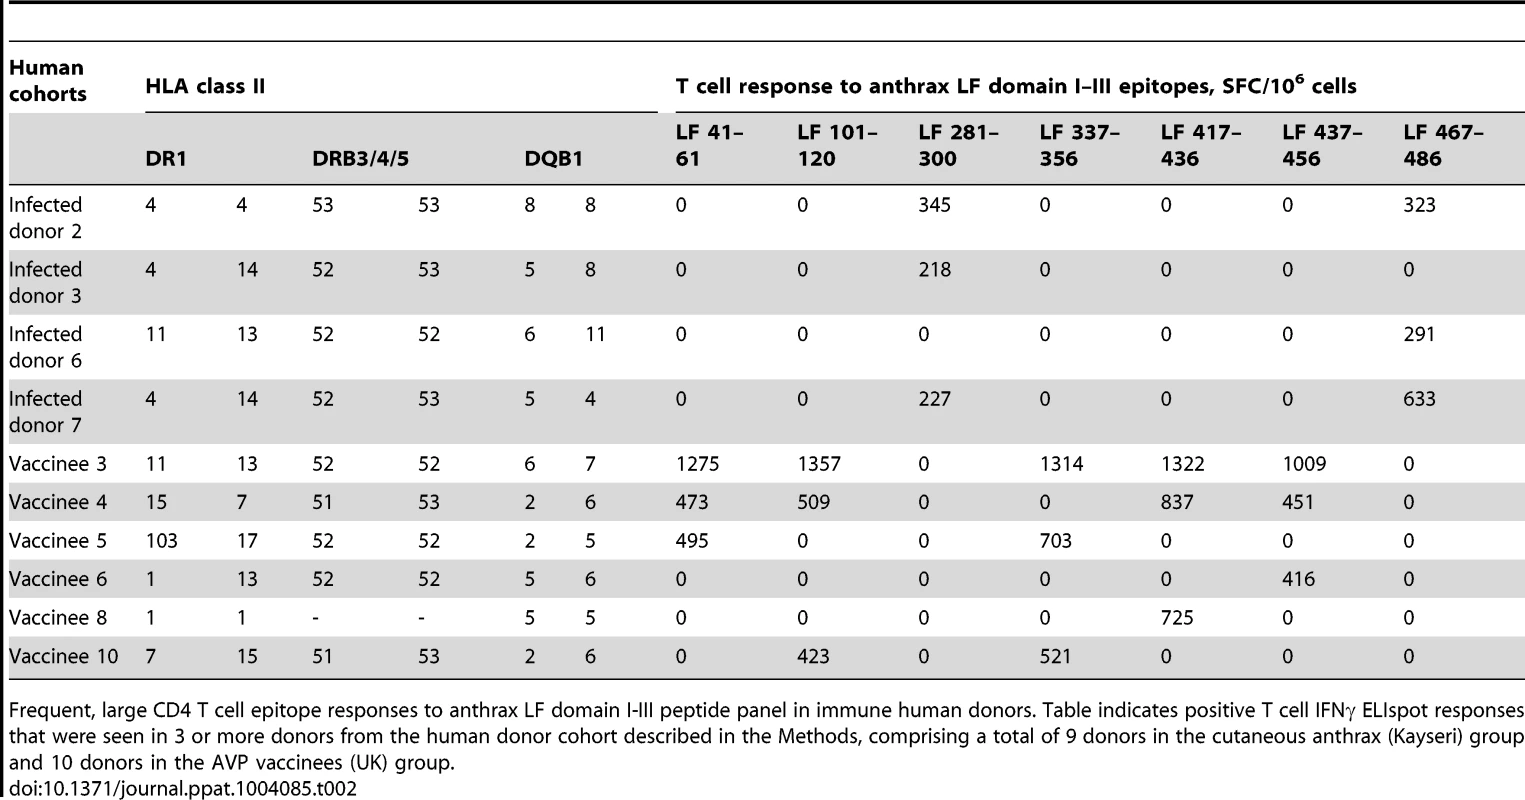 Frequent, large CD4 T cell epitope responses to anthrax LF domain I–III peptide panel in immune human donors.